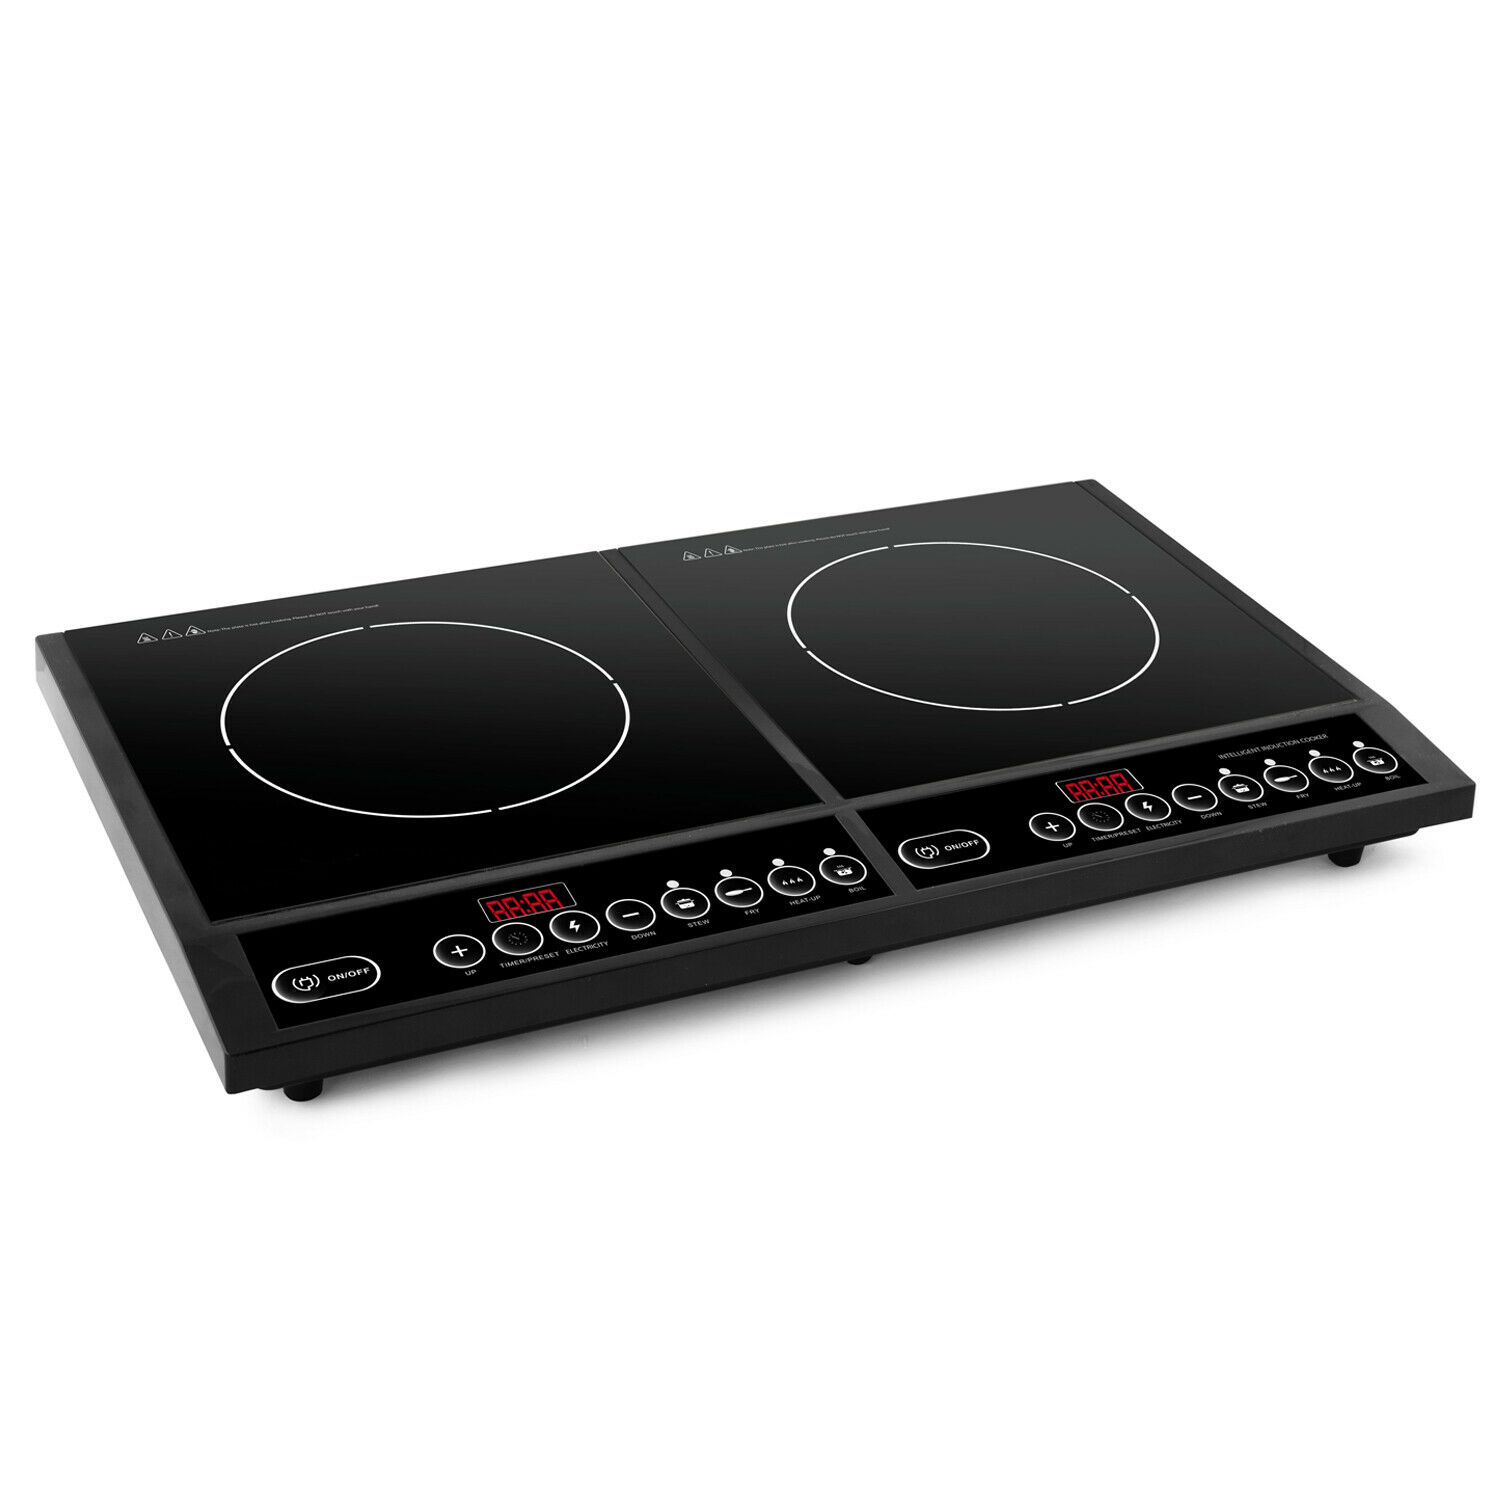 Sleek price of induction cooker